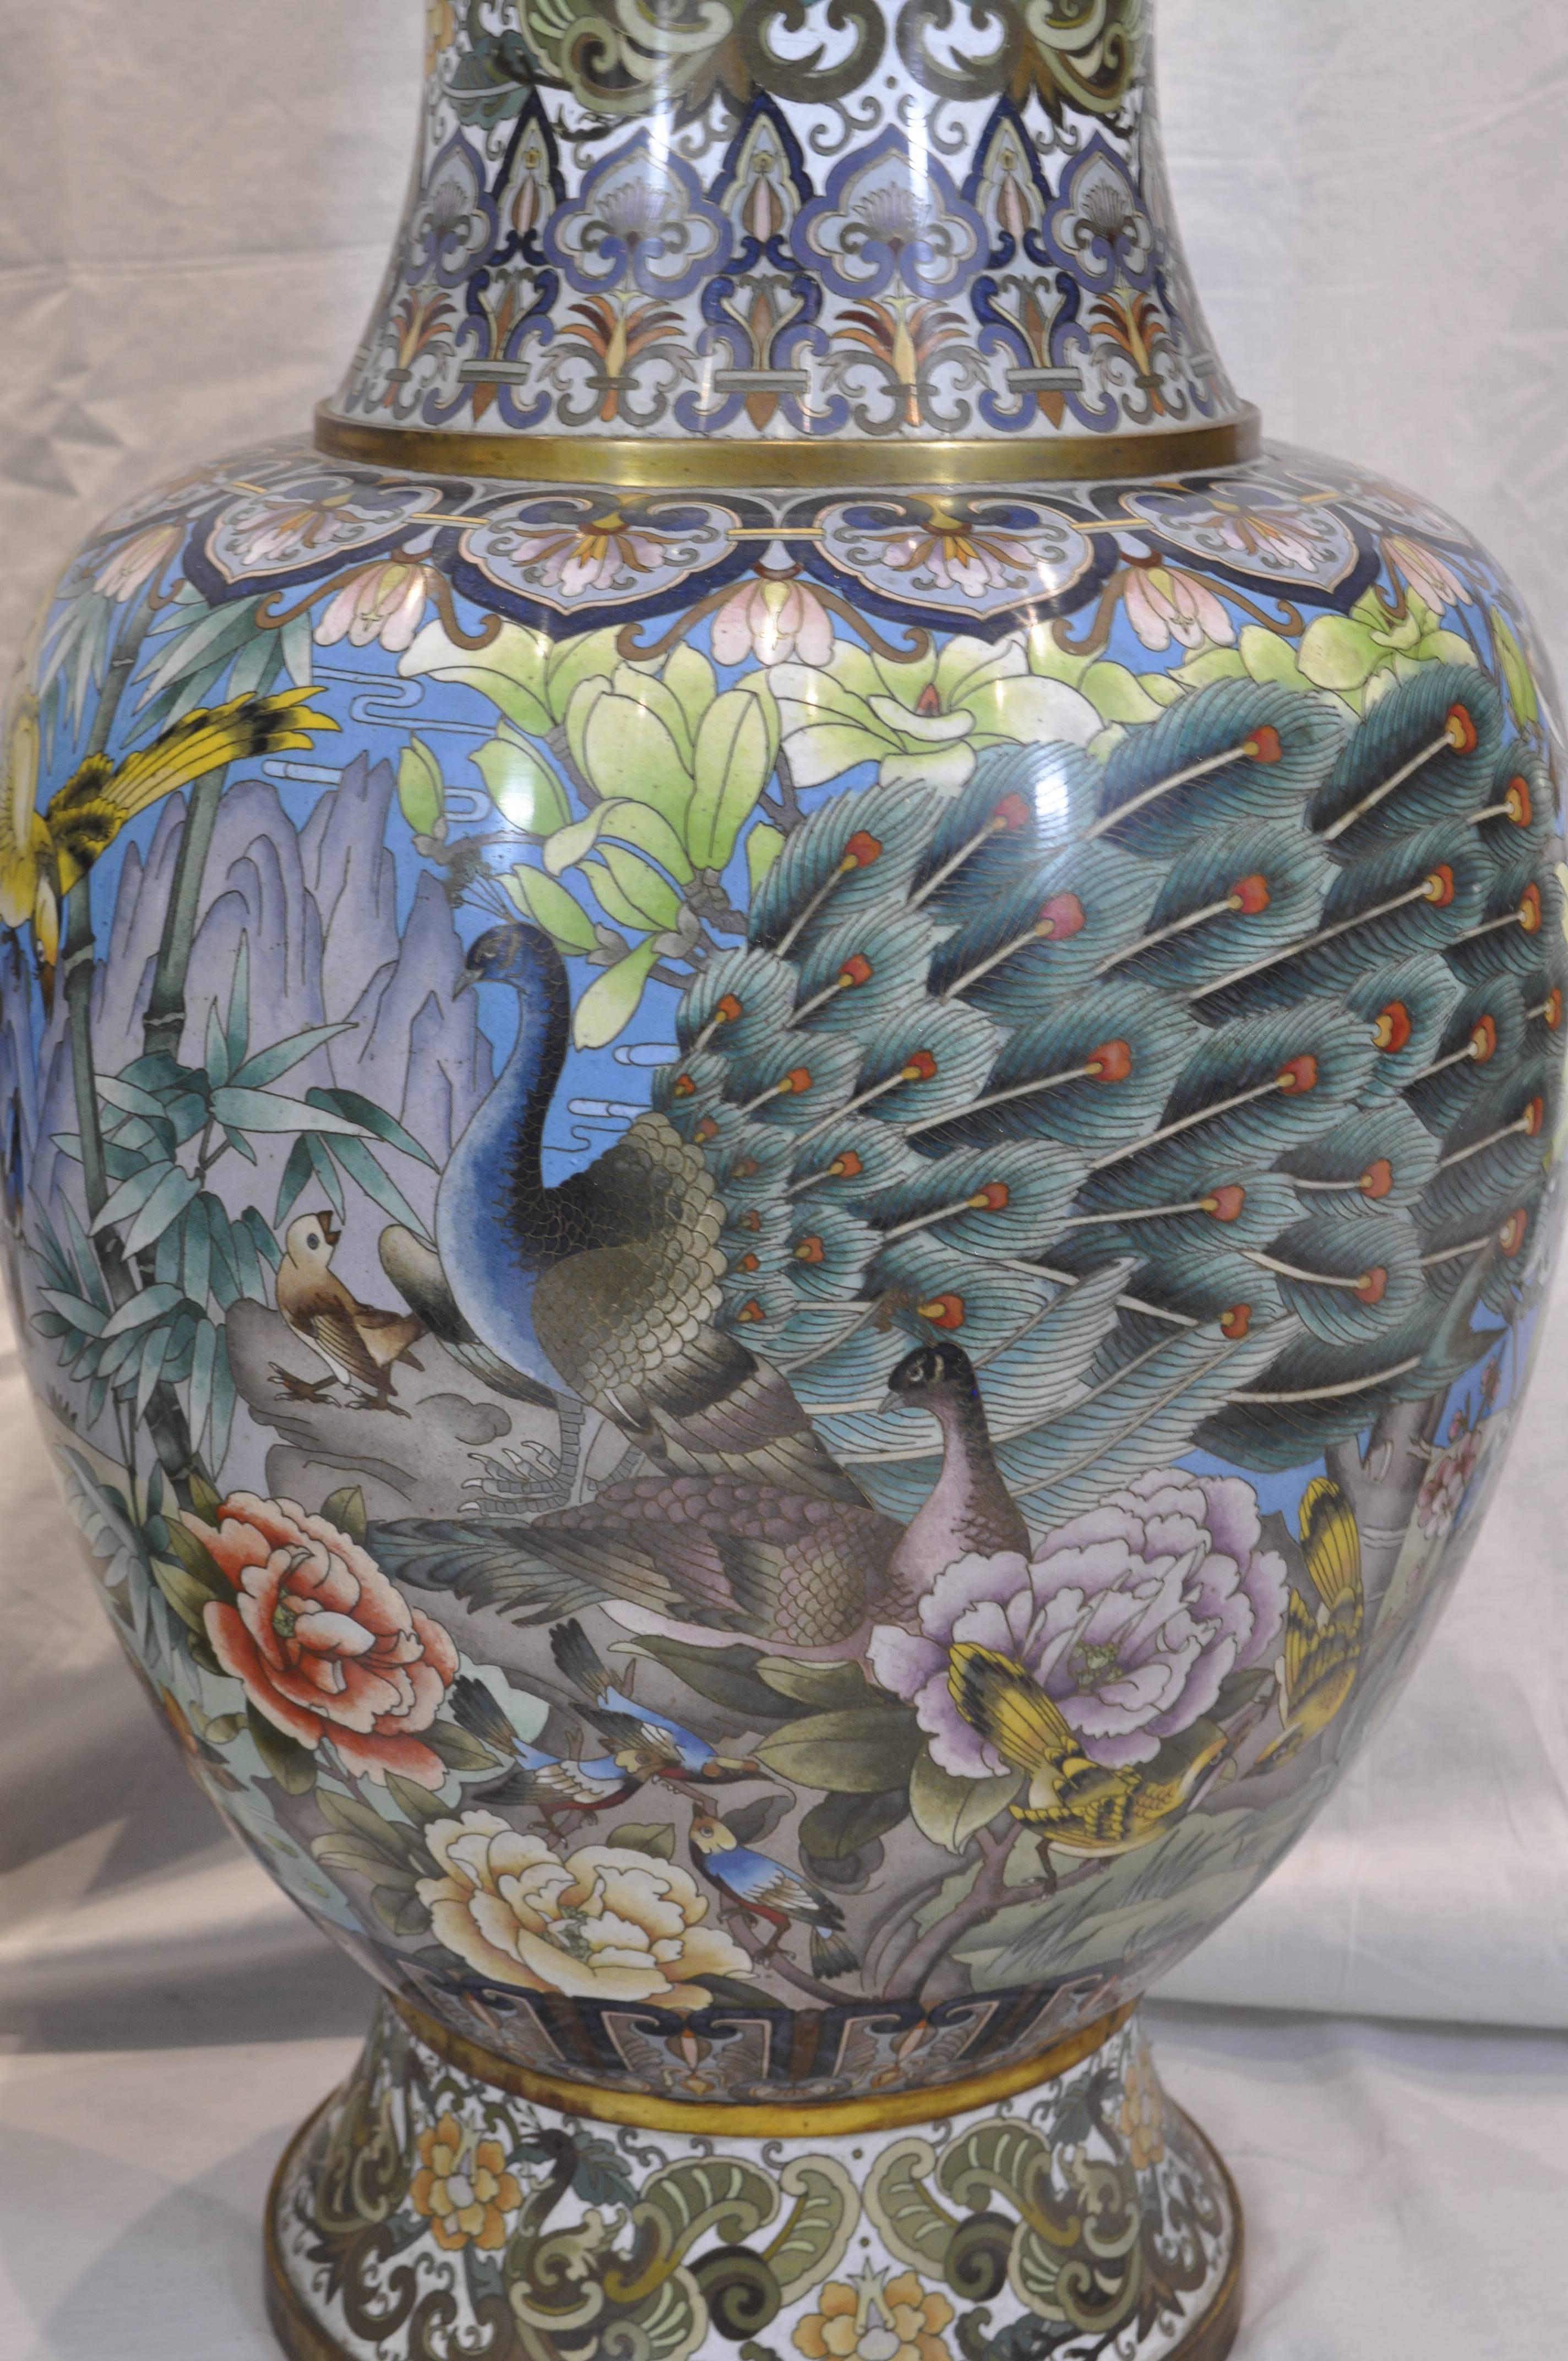 A pair of Chinese ormolu-mounted polychrome cloisonné vases decorated with a variety of birds including: roosters, peacocks, parrots, pigeons, doves and more. They also feature flowers and branches on the main body sections, whilst the neck and foot